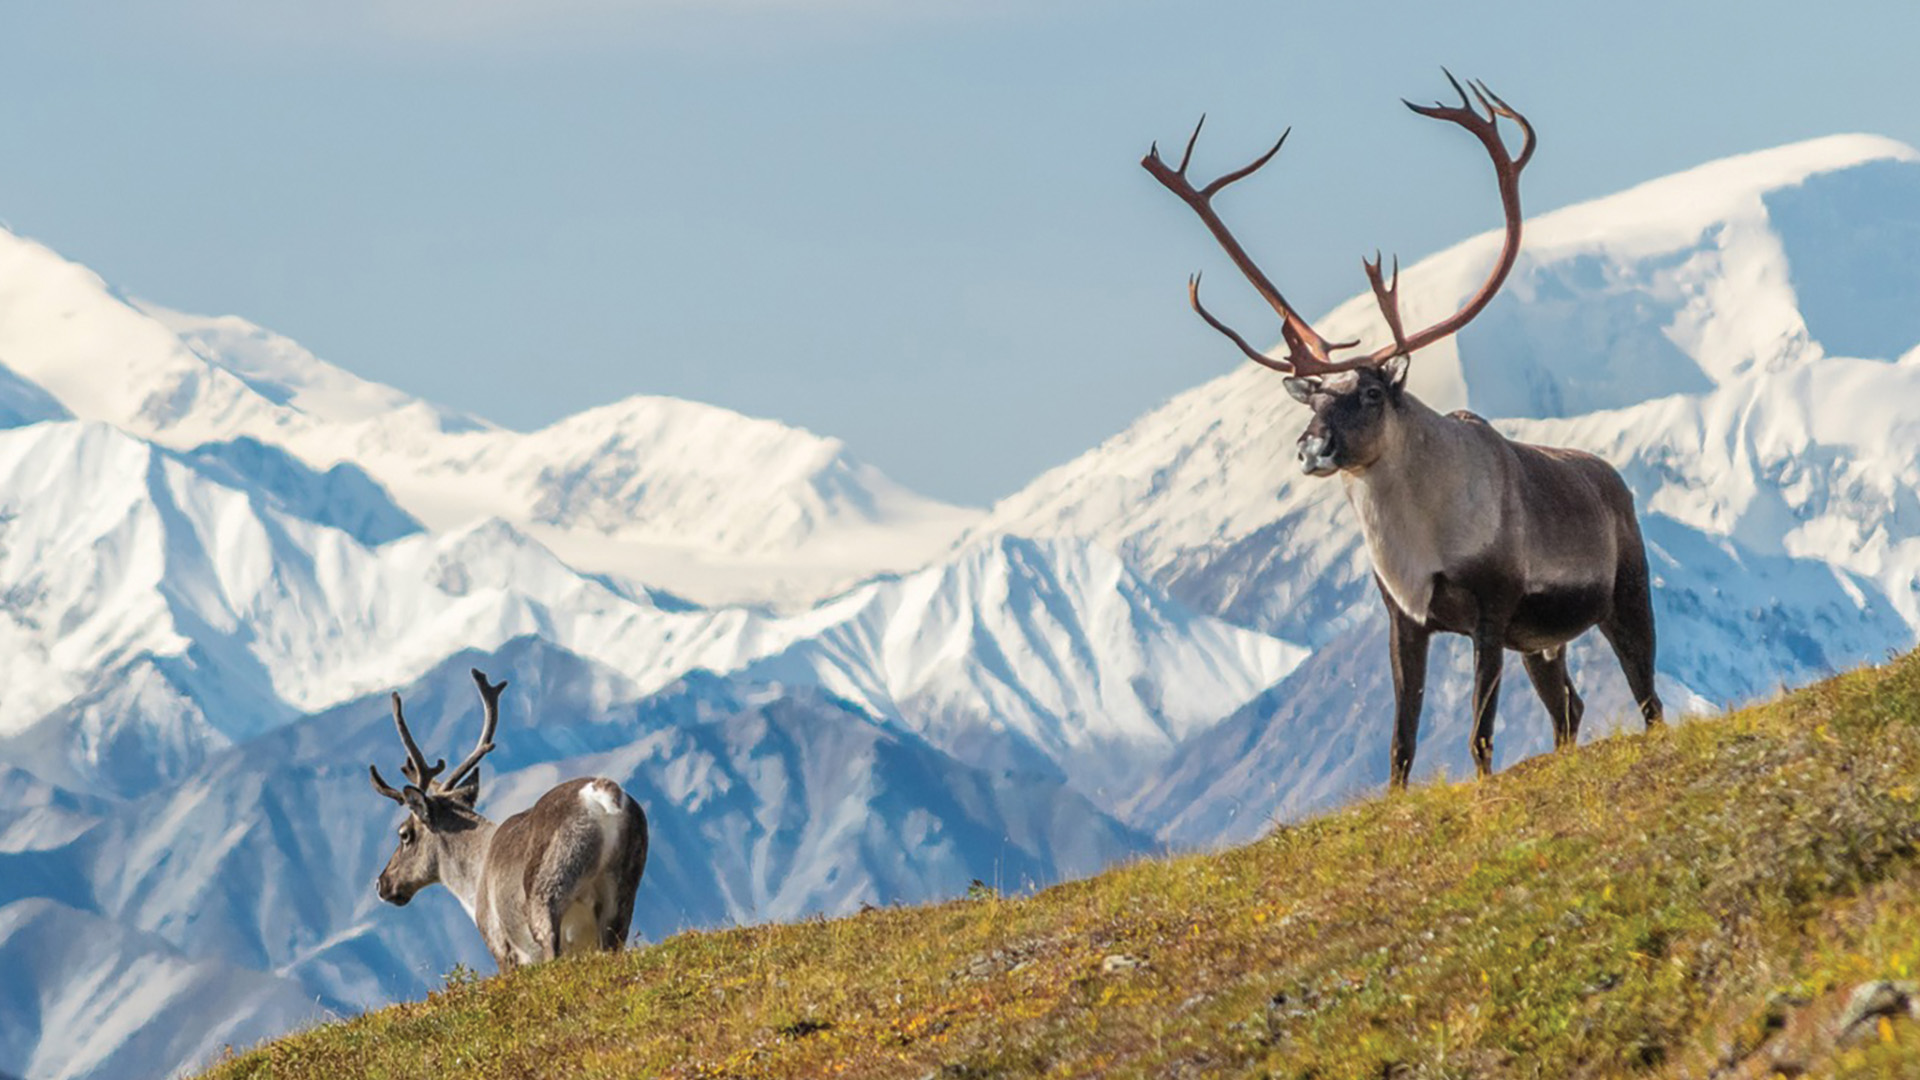 caribou standing on grassy hill with mountain background